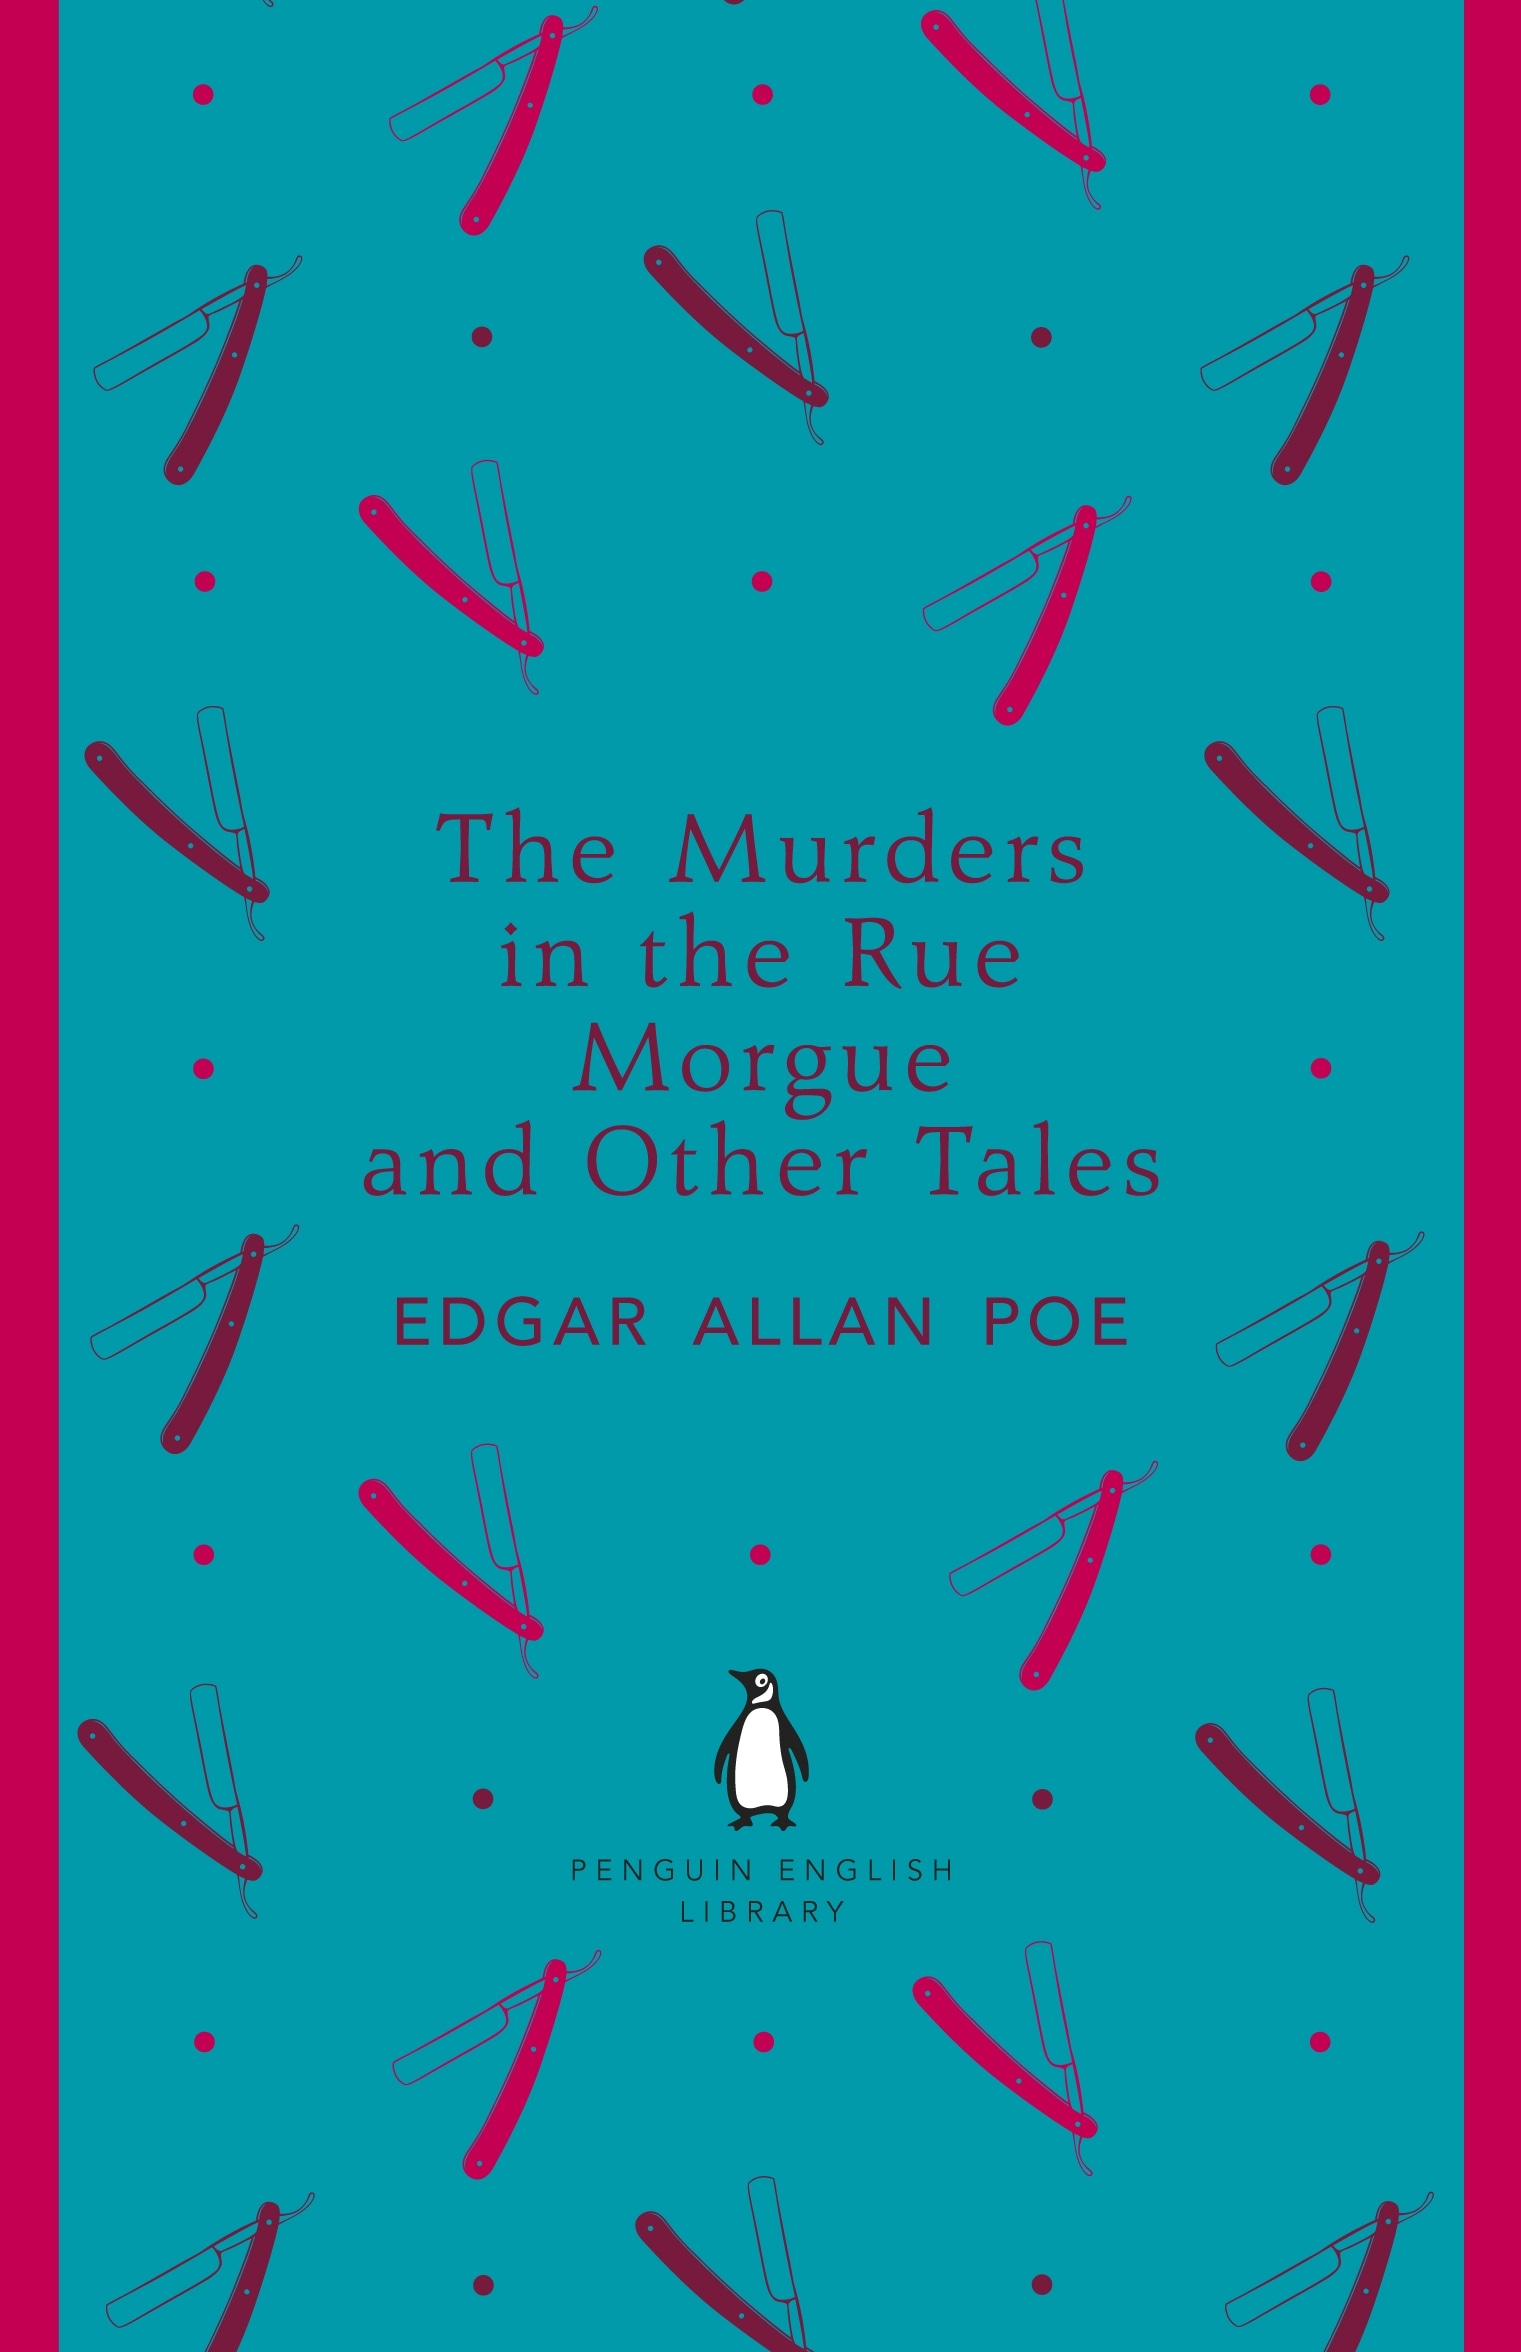 Book “The Murders in the Rue Morgue and Other Tales” by Edgar Allan Poe — April 26, 2012